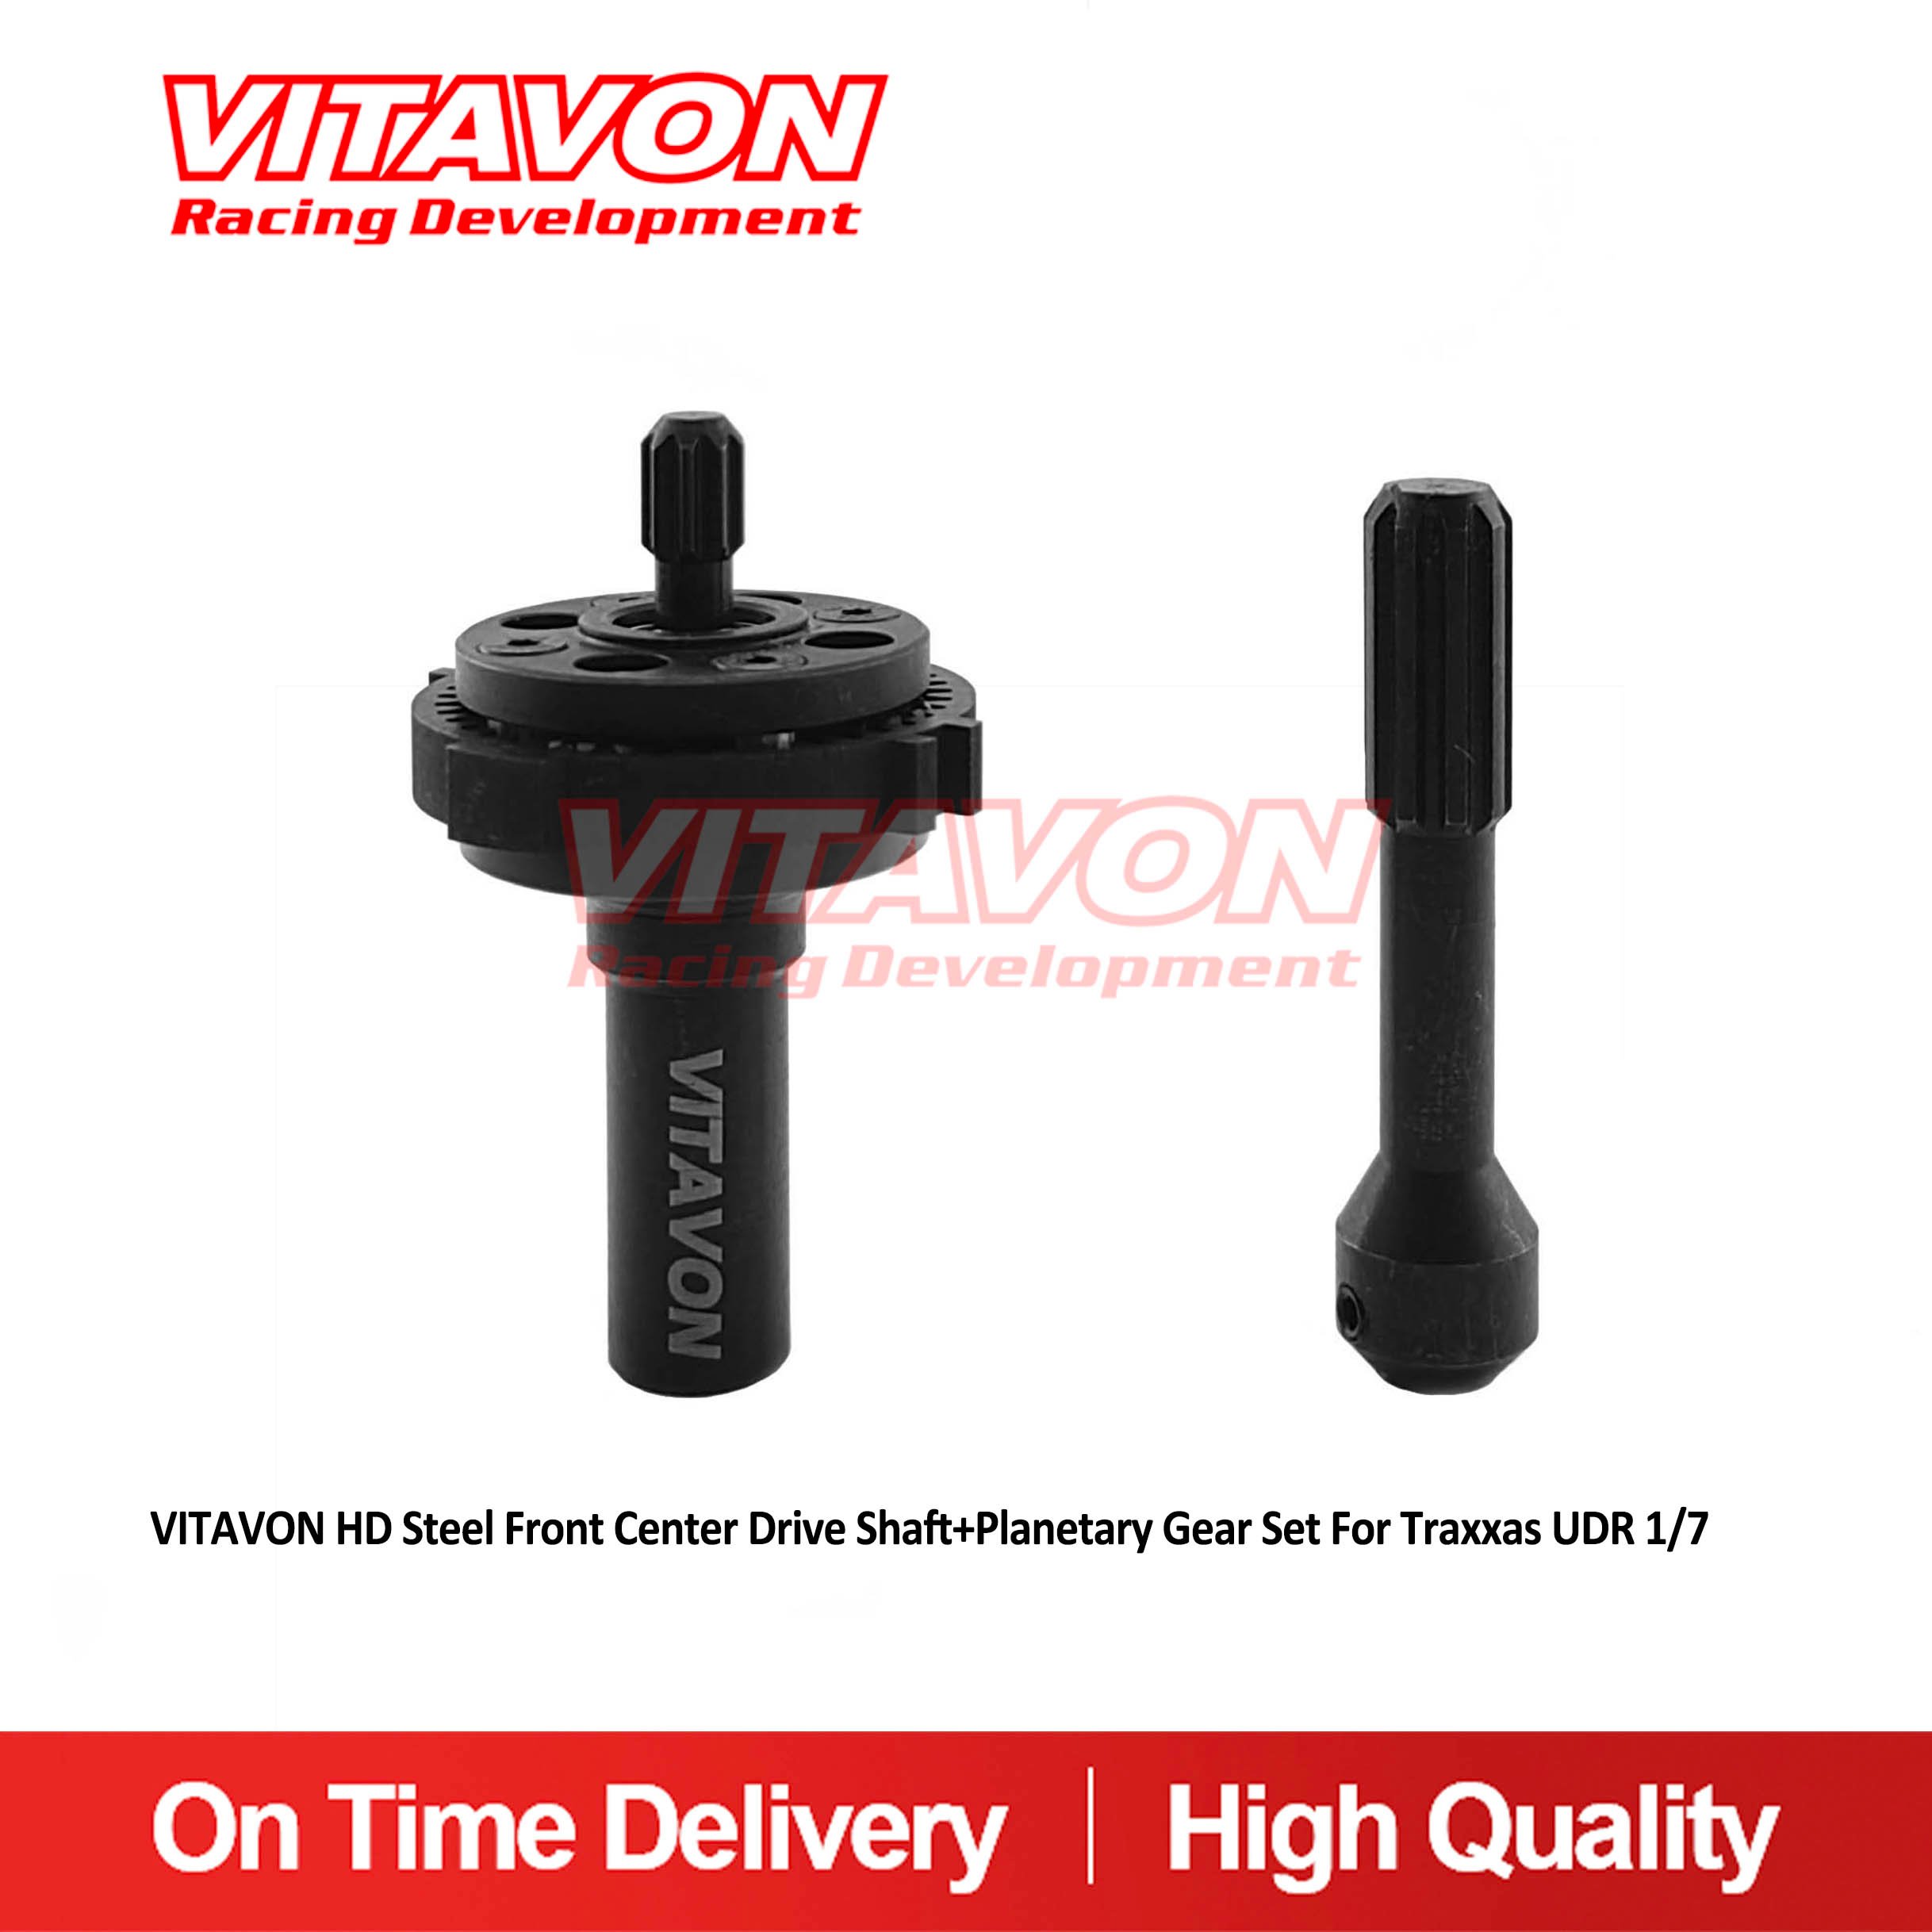 VITAVON HD Steel Front Center Drive Shaft+Planetary Gear Set For Traxxas UDR 1/7